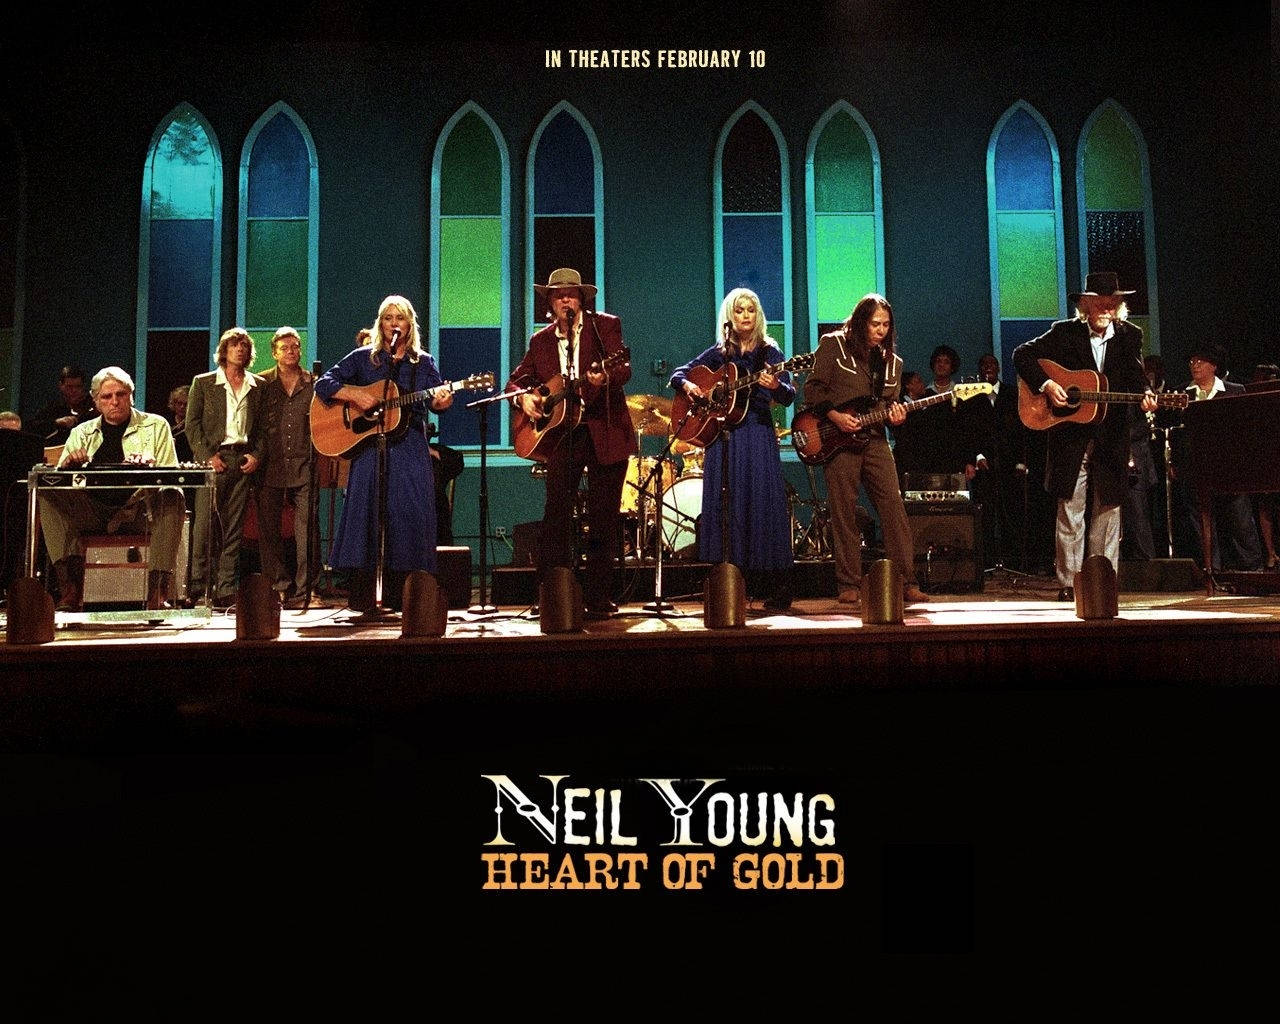 Neil Young Heart Of Gold Concert Film Poster Wallpaper